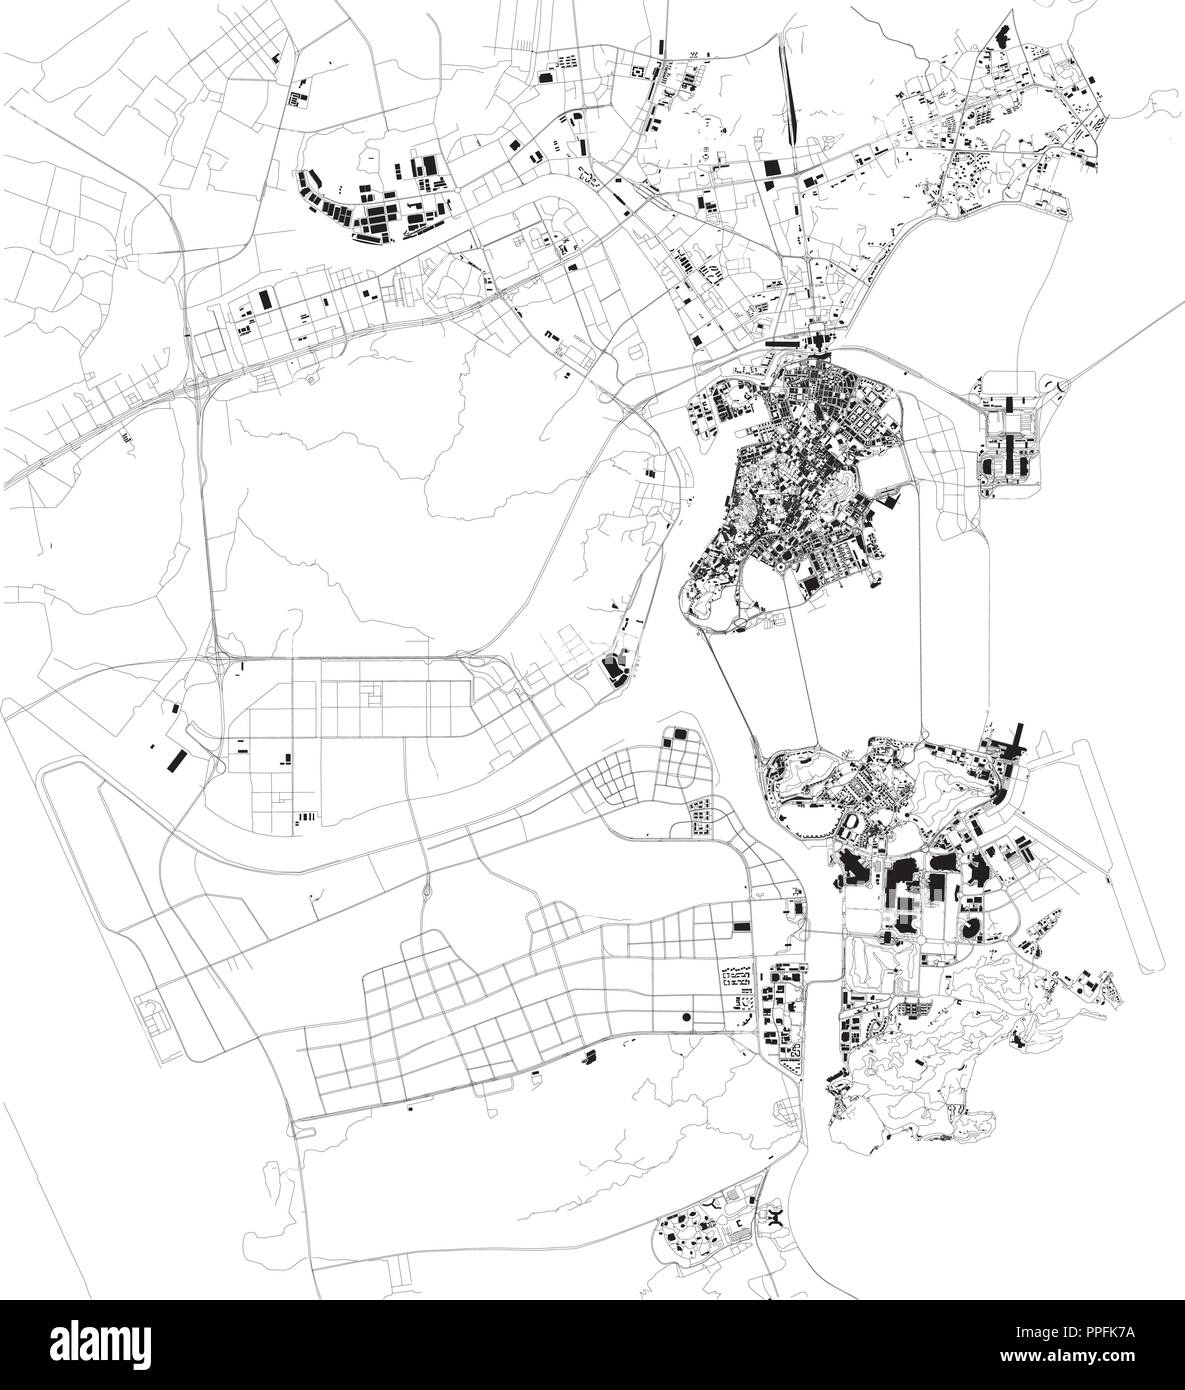 Map of Macau, Macao, satellite view, black and white map. Street directory and city map. China Stock Vector